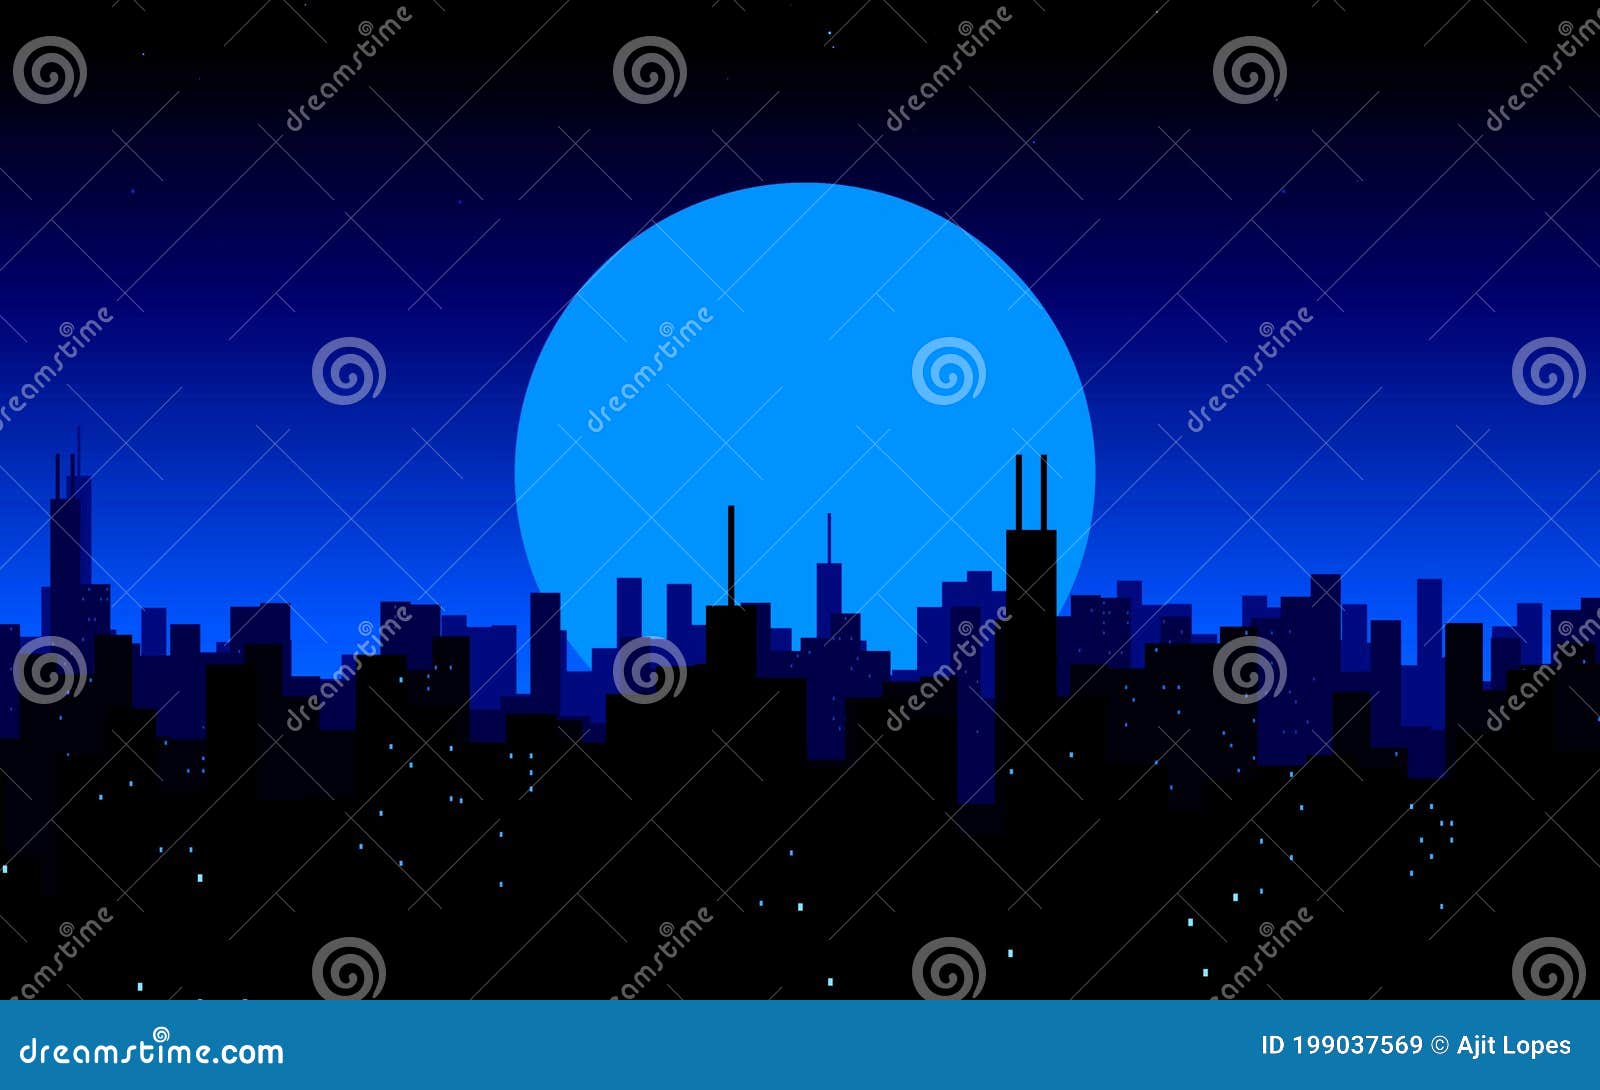 Moon Rising Over a City. Night City Skyline. Cityscape Background ...